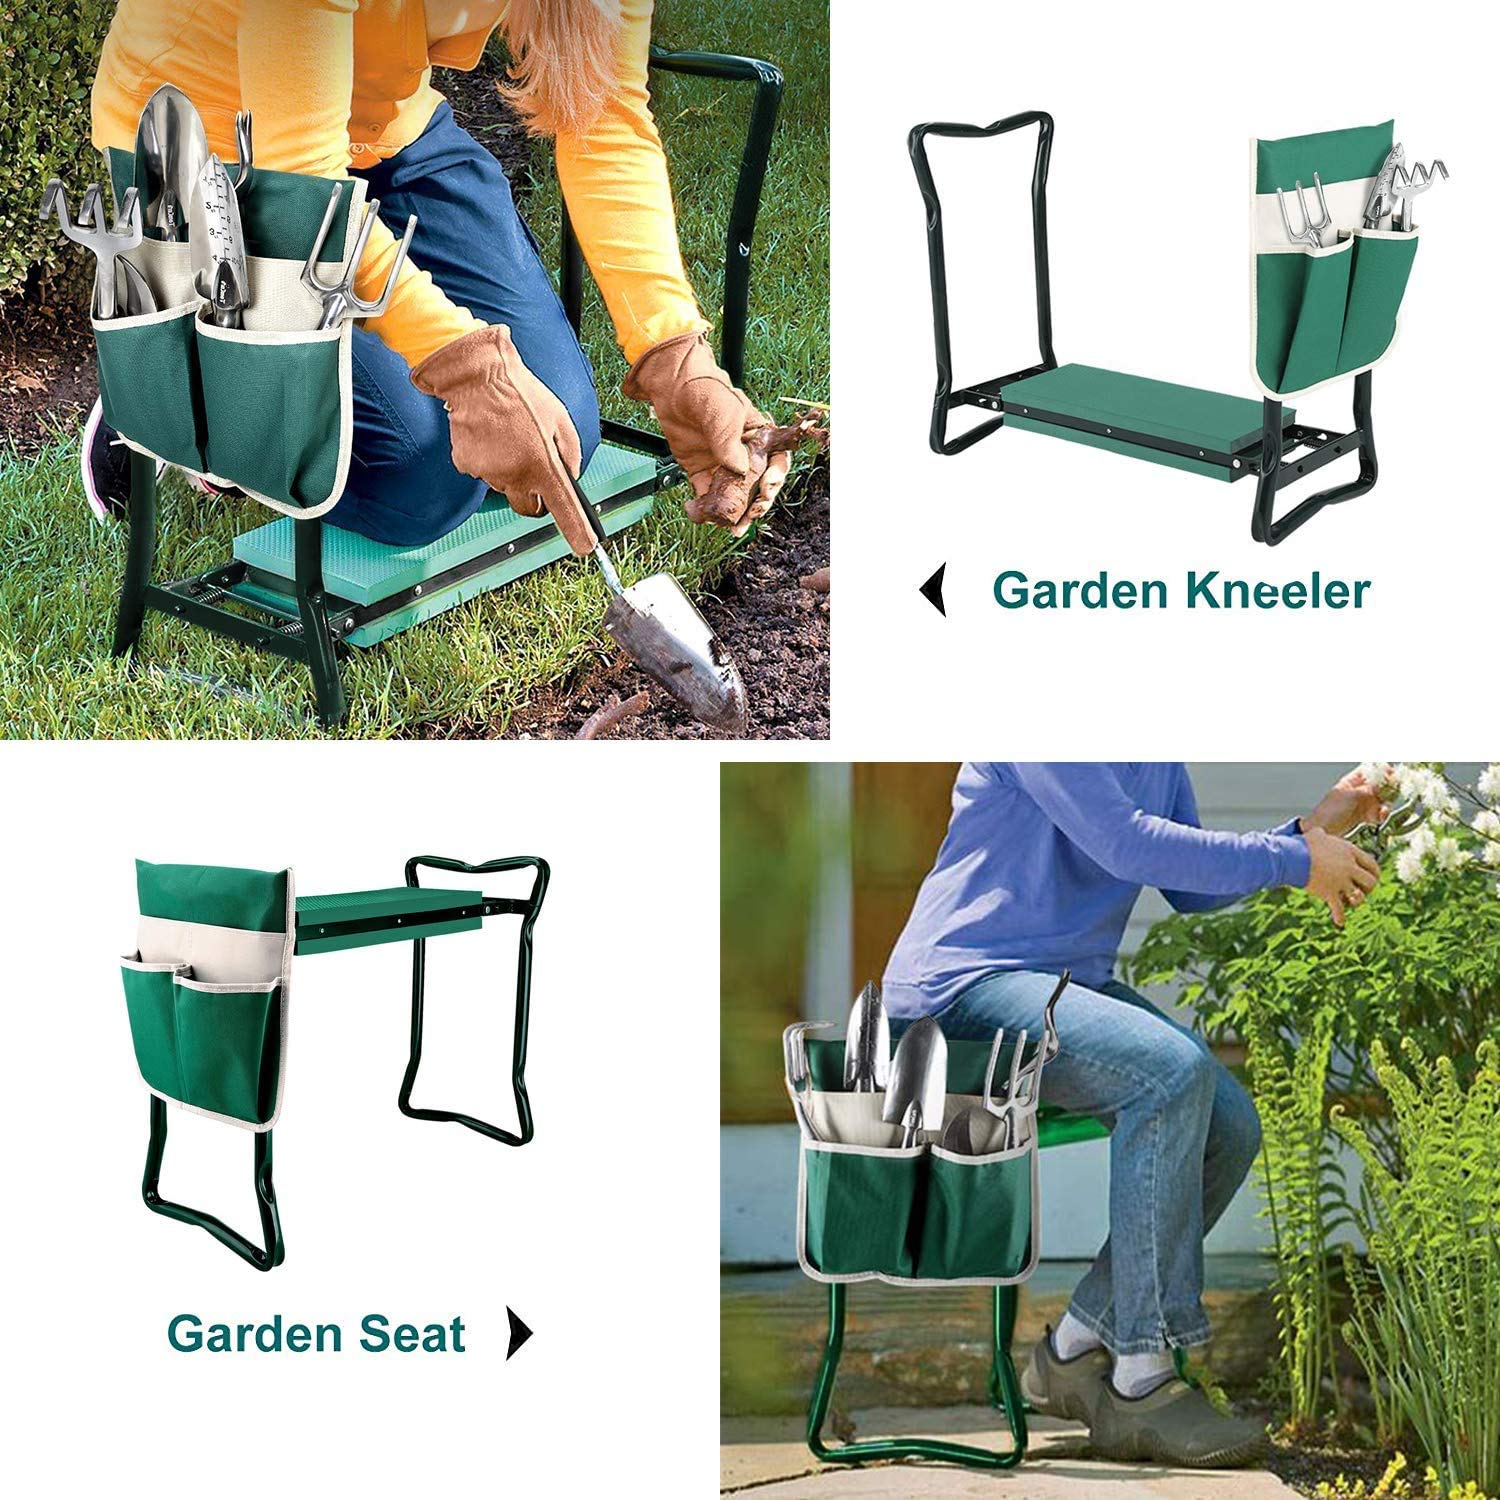 BESTHLS Garden Kneeler and Seat - Heavy Duty Folding Stool for Gardening, Protects Knees and Back, Supports up to 330 lbs - Grea